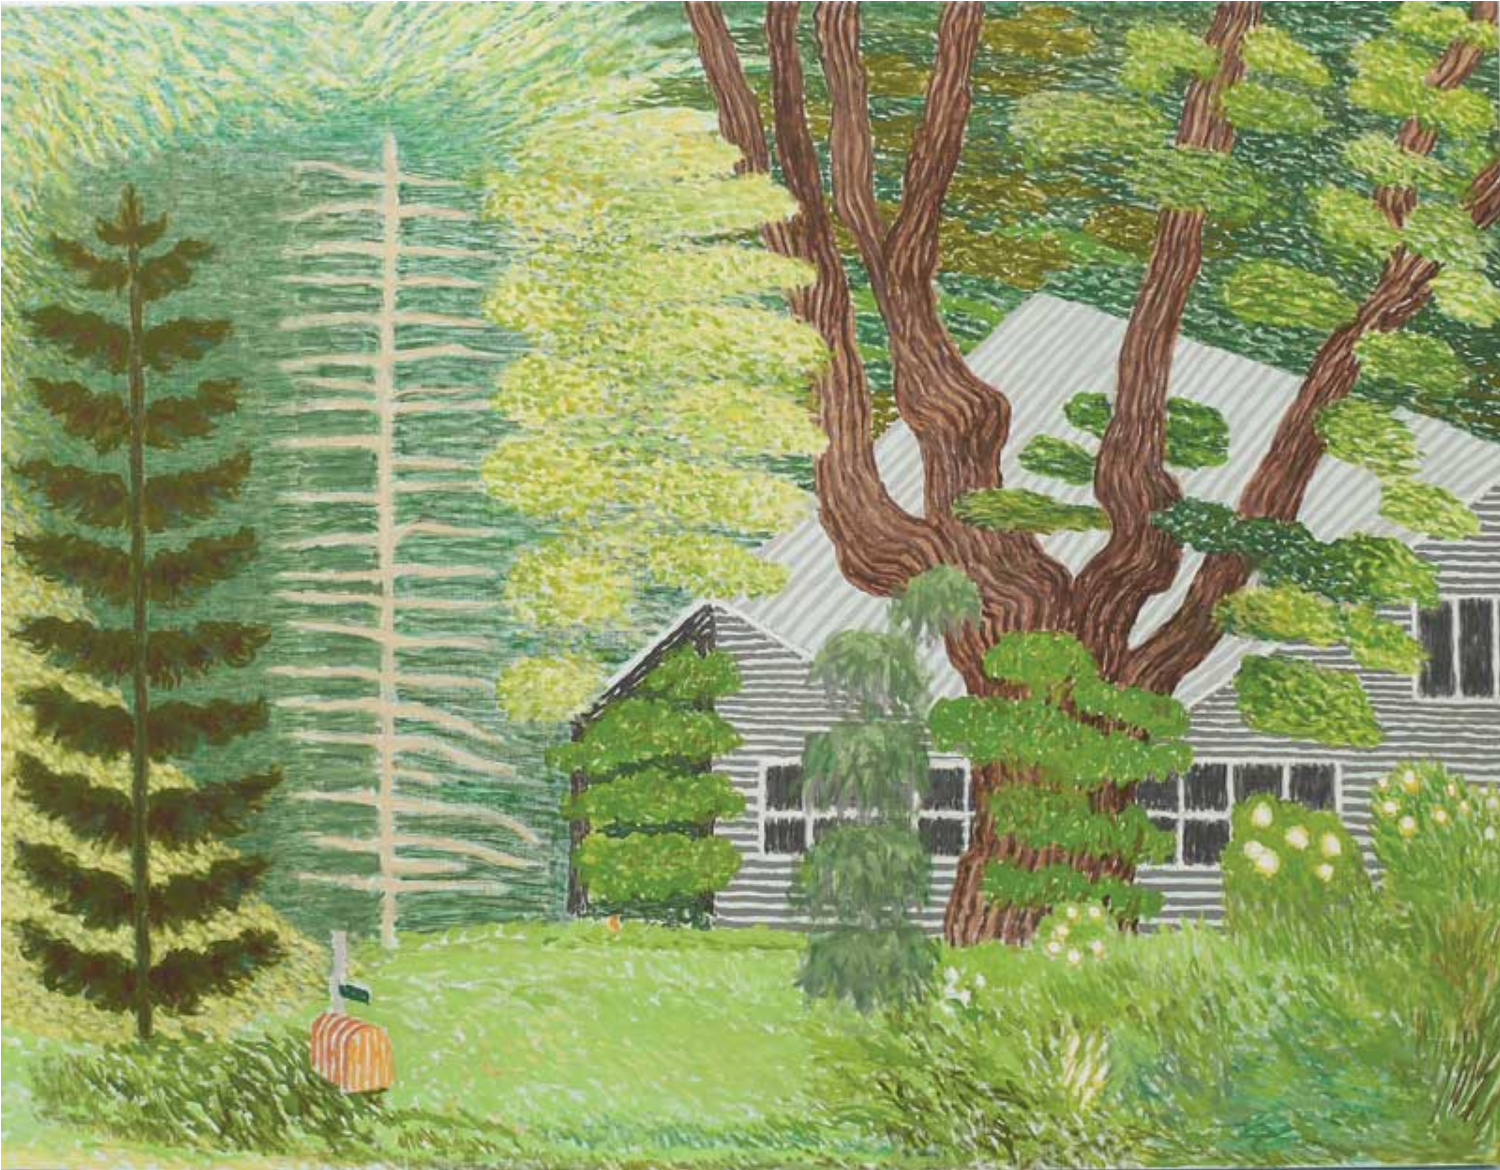 The home of the artist’s son and his wife is the subject of this painting. Tom and Kathy’s Summer House in Maine, 2020, oil on linen, 34 by 44½ inches. Courtesy the artist and DC Moore Gallery, New York